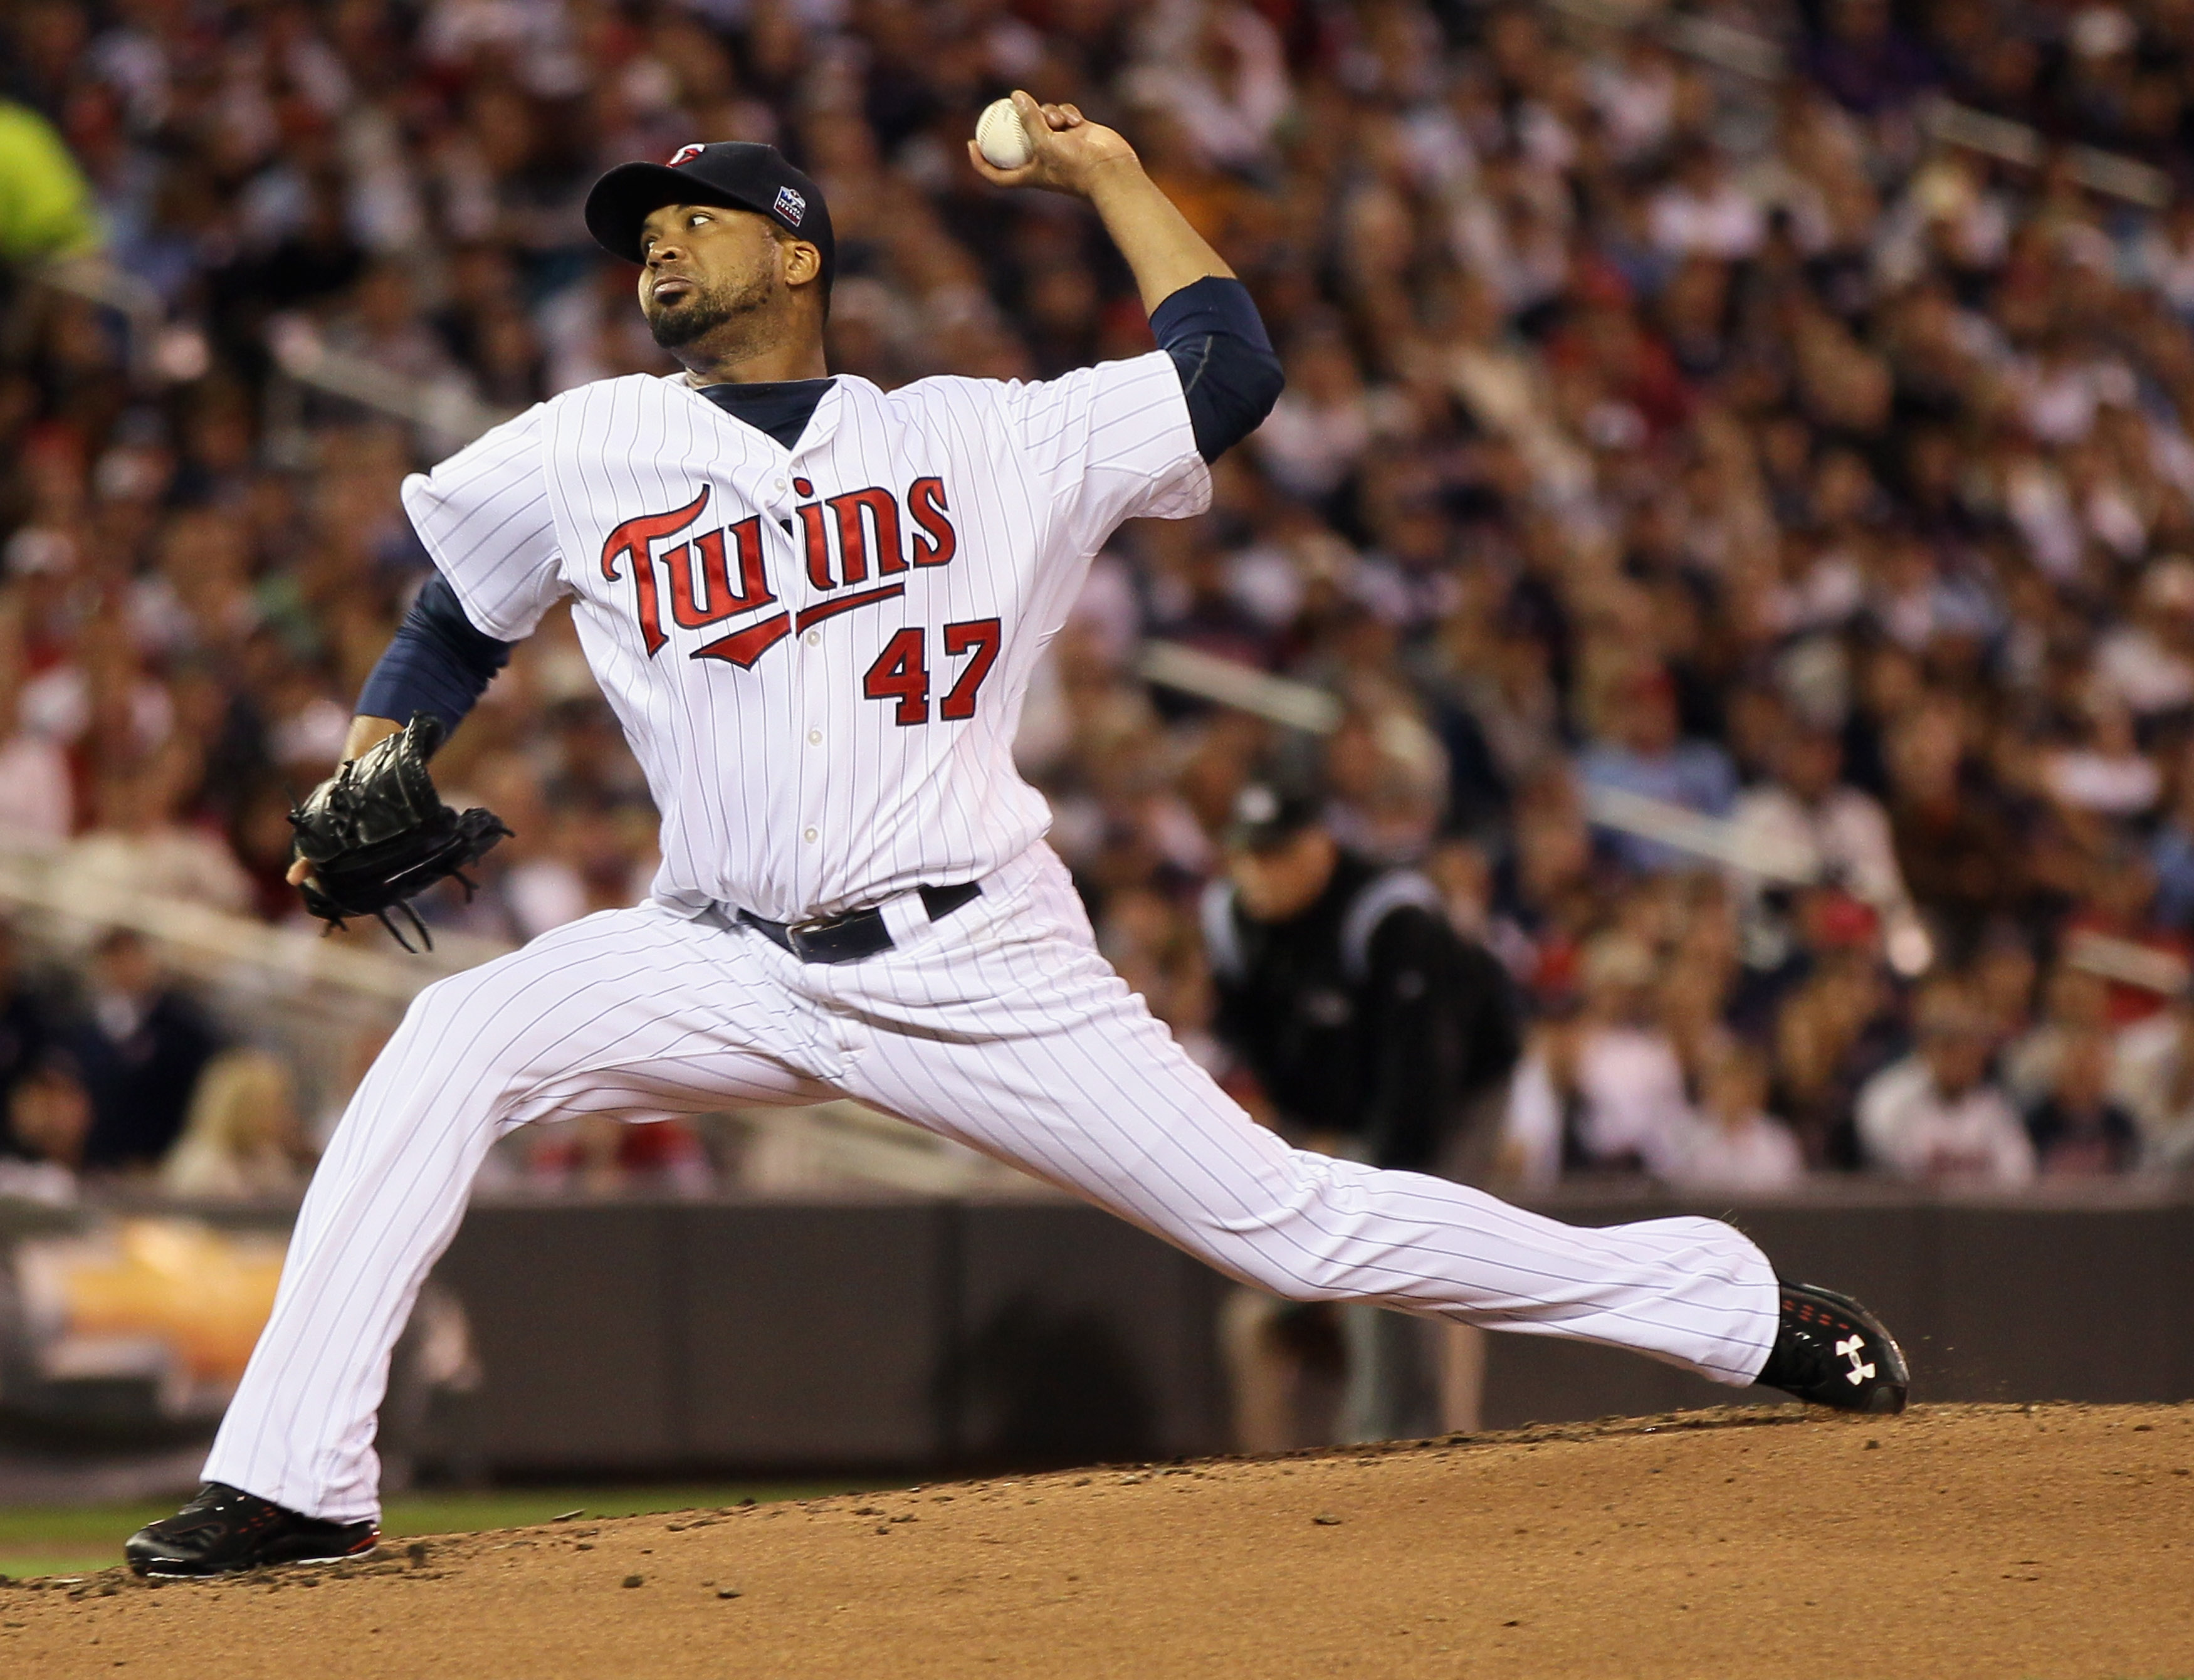 MINNEAPOLIS - OCTOBER 06: Francisco Liriano #47 of the Minnesota Twins delivers a pitch in the second inning against the New York Yankees during game one of the ALDS on October 6, 2010 at Target Field in Minneapolis, Minnesota.  (Photo by Elsa/Getty Image